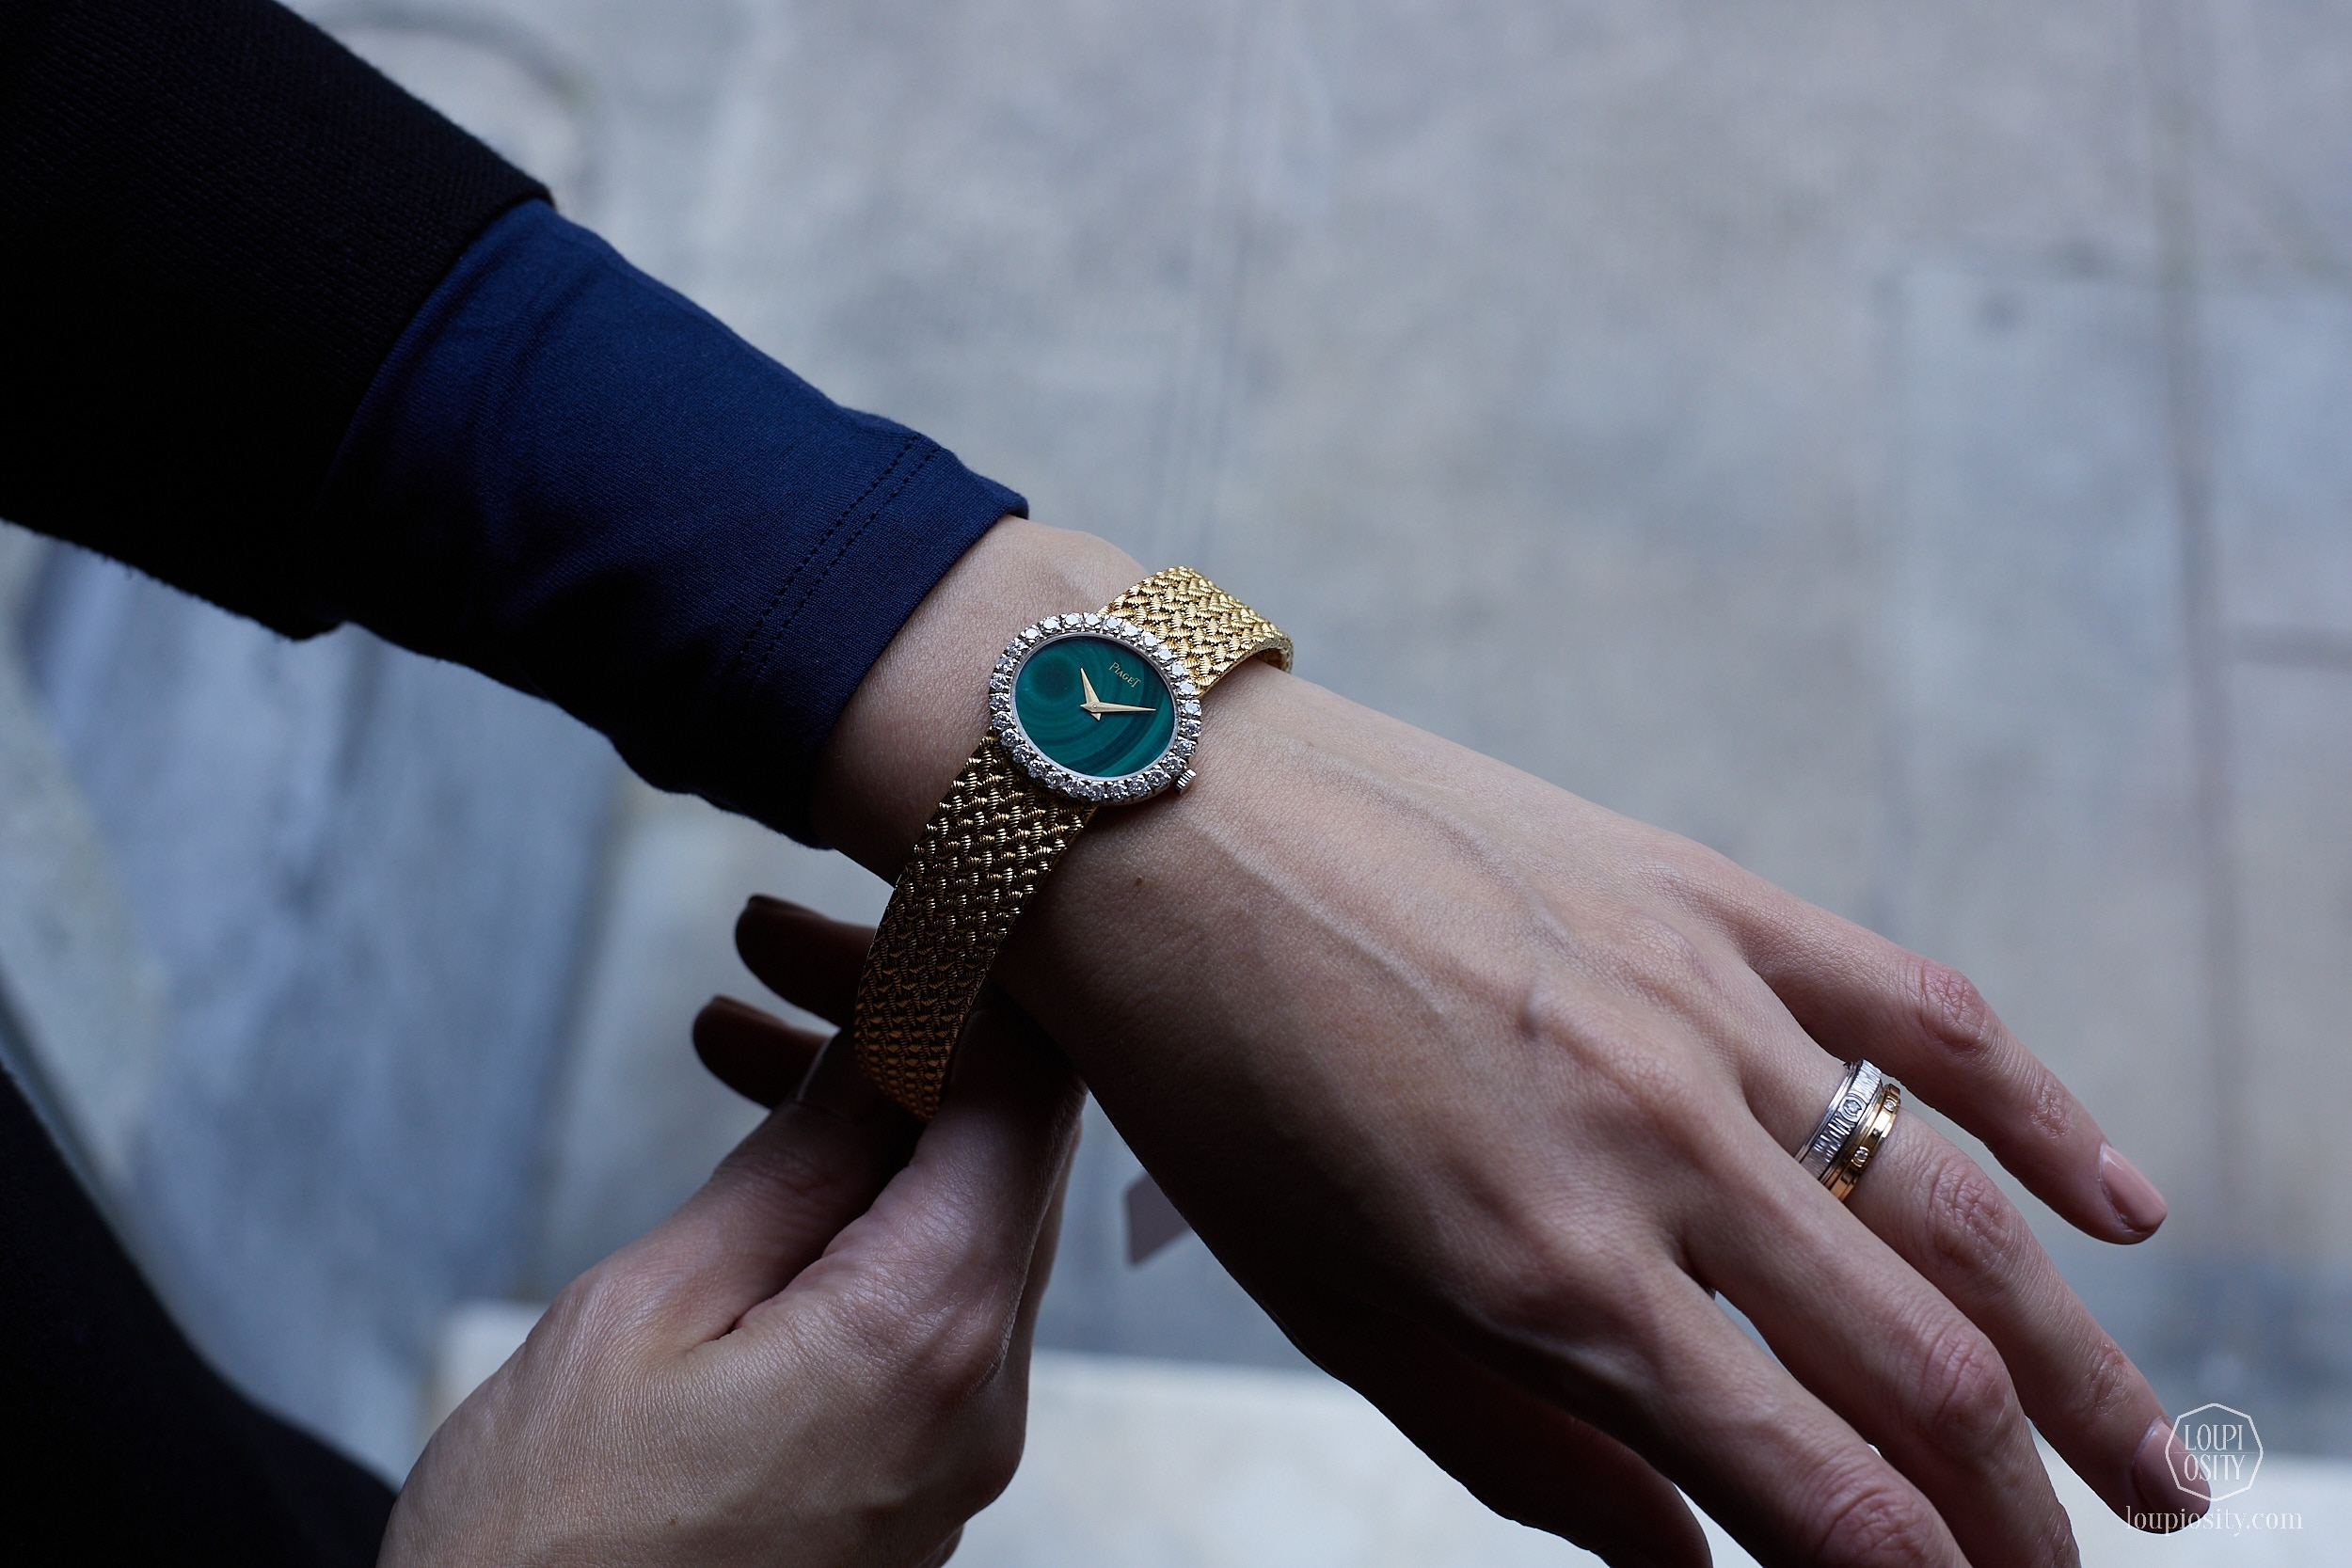 Lot 431 Piaget watch with malachite dial